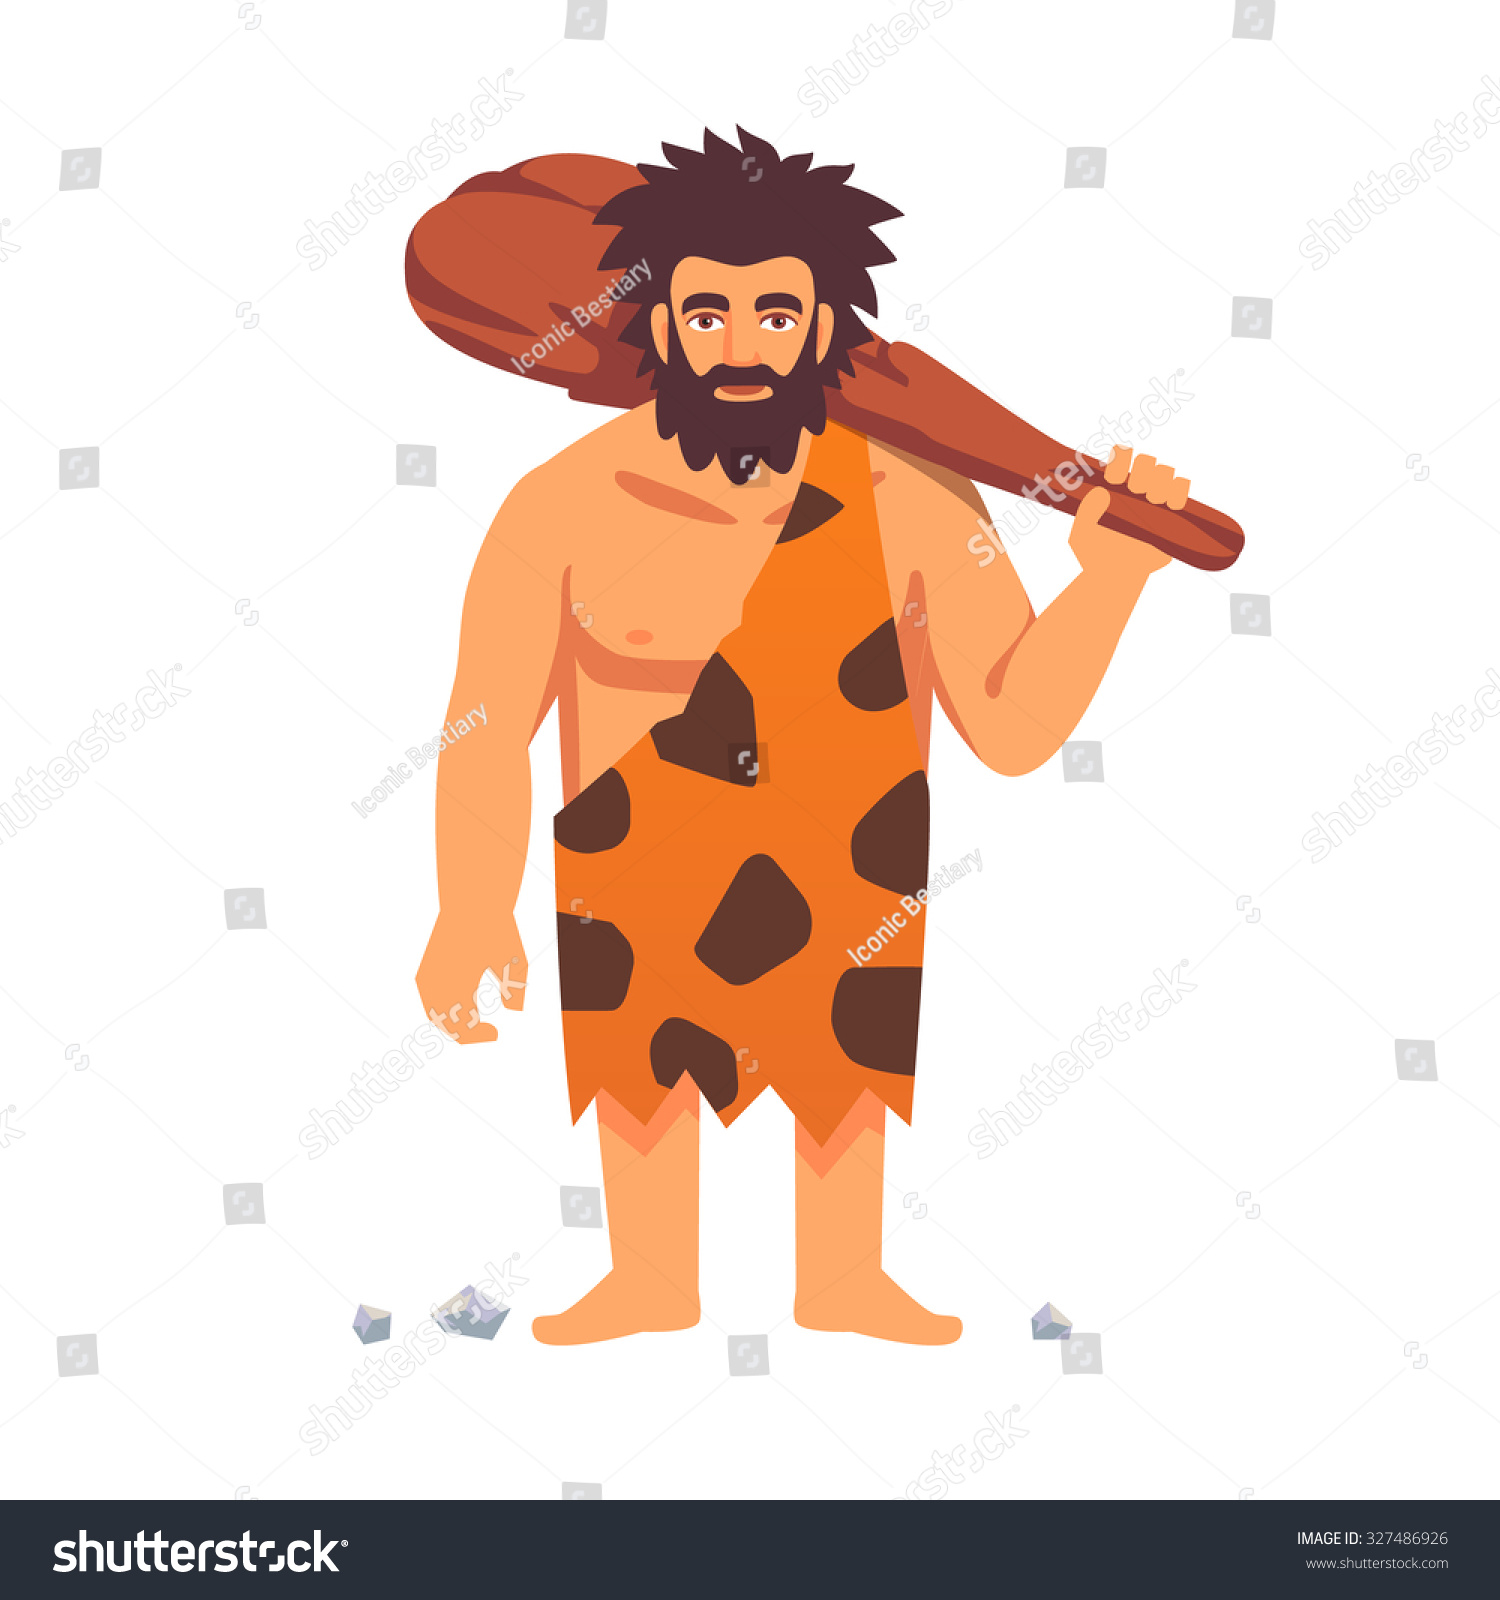 clipart of early man - photo #23